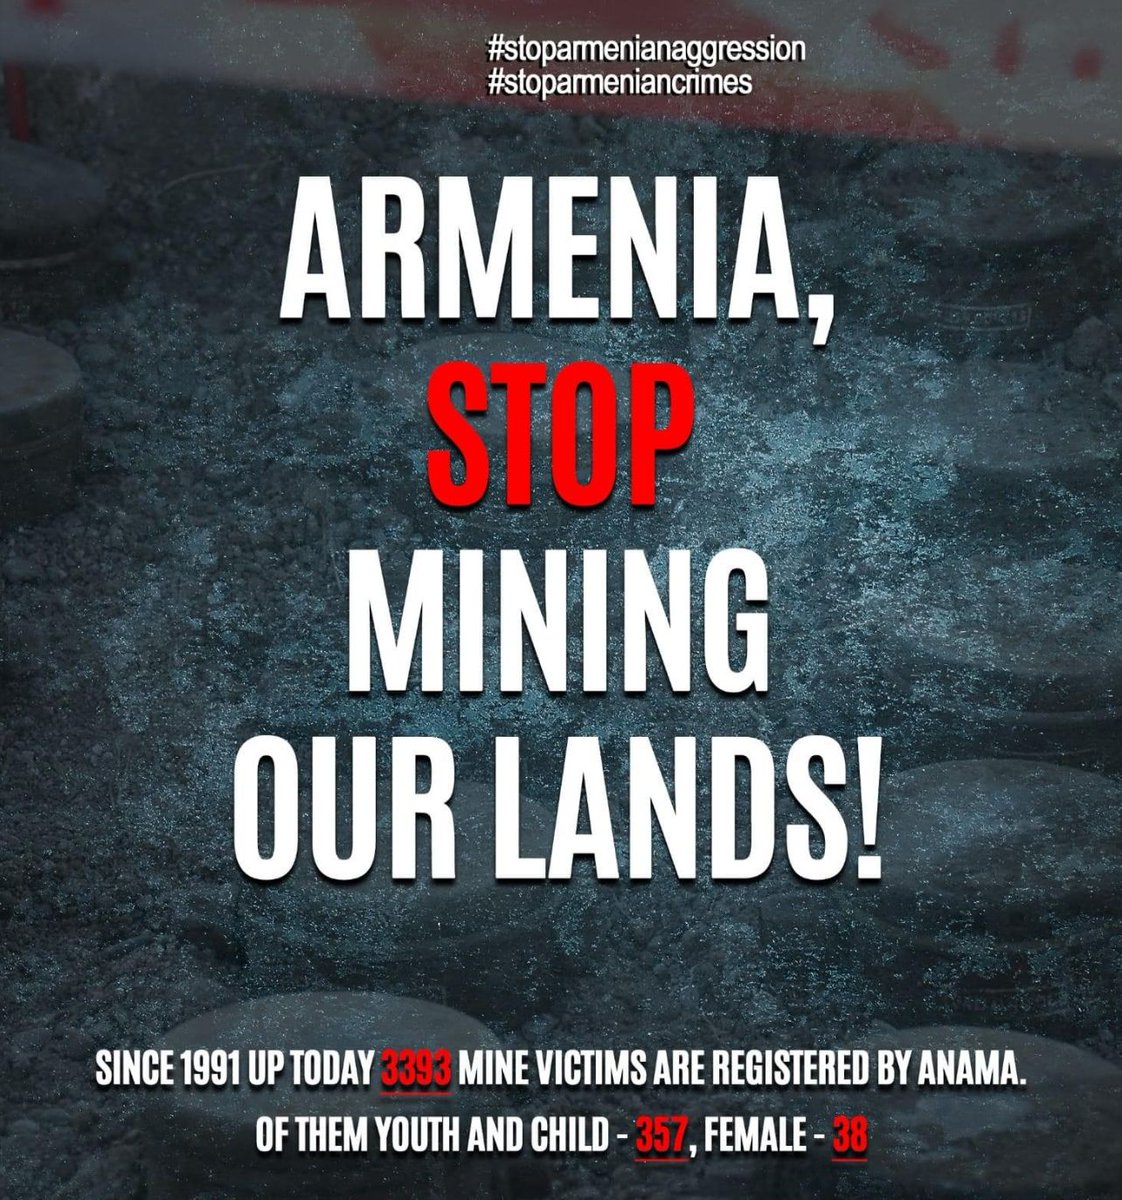 📍In the last three years, more than 300 Azerbaijanis became victims of Armenian #mineterror. The number of #mines buried by #Armenia in #Azerbaijan is more than 1.5 million.
#Armenianaggression 
#armenianterror